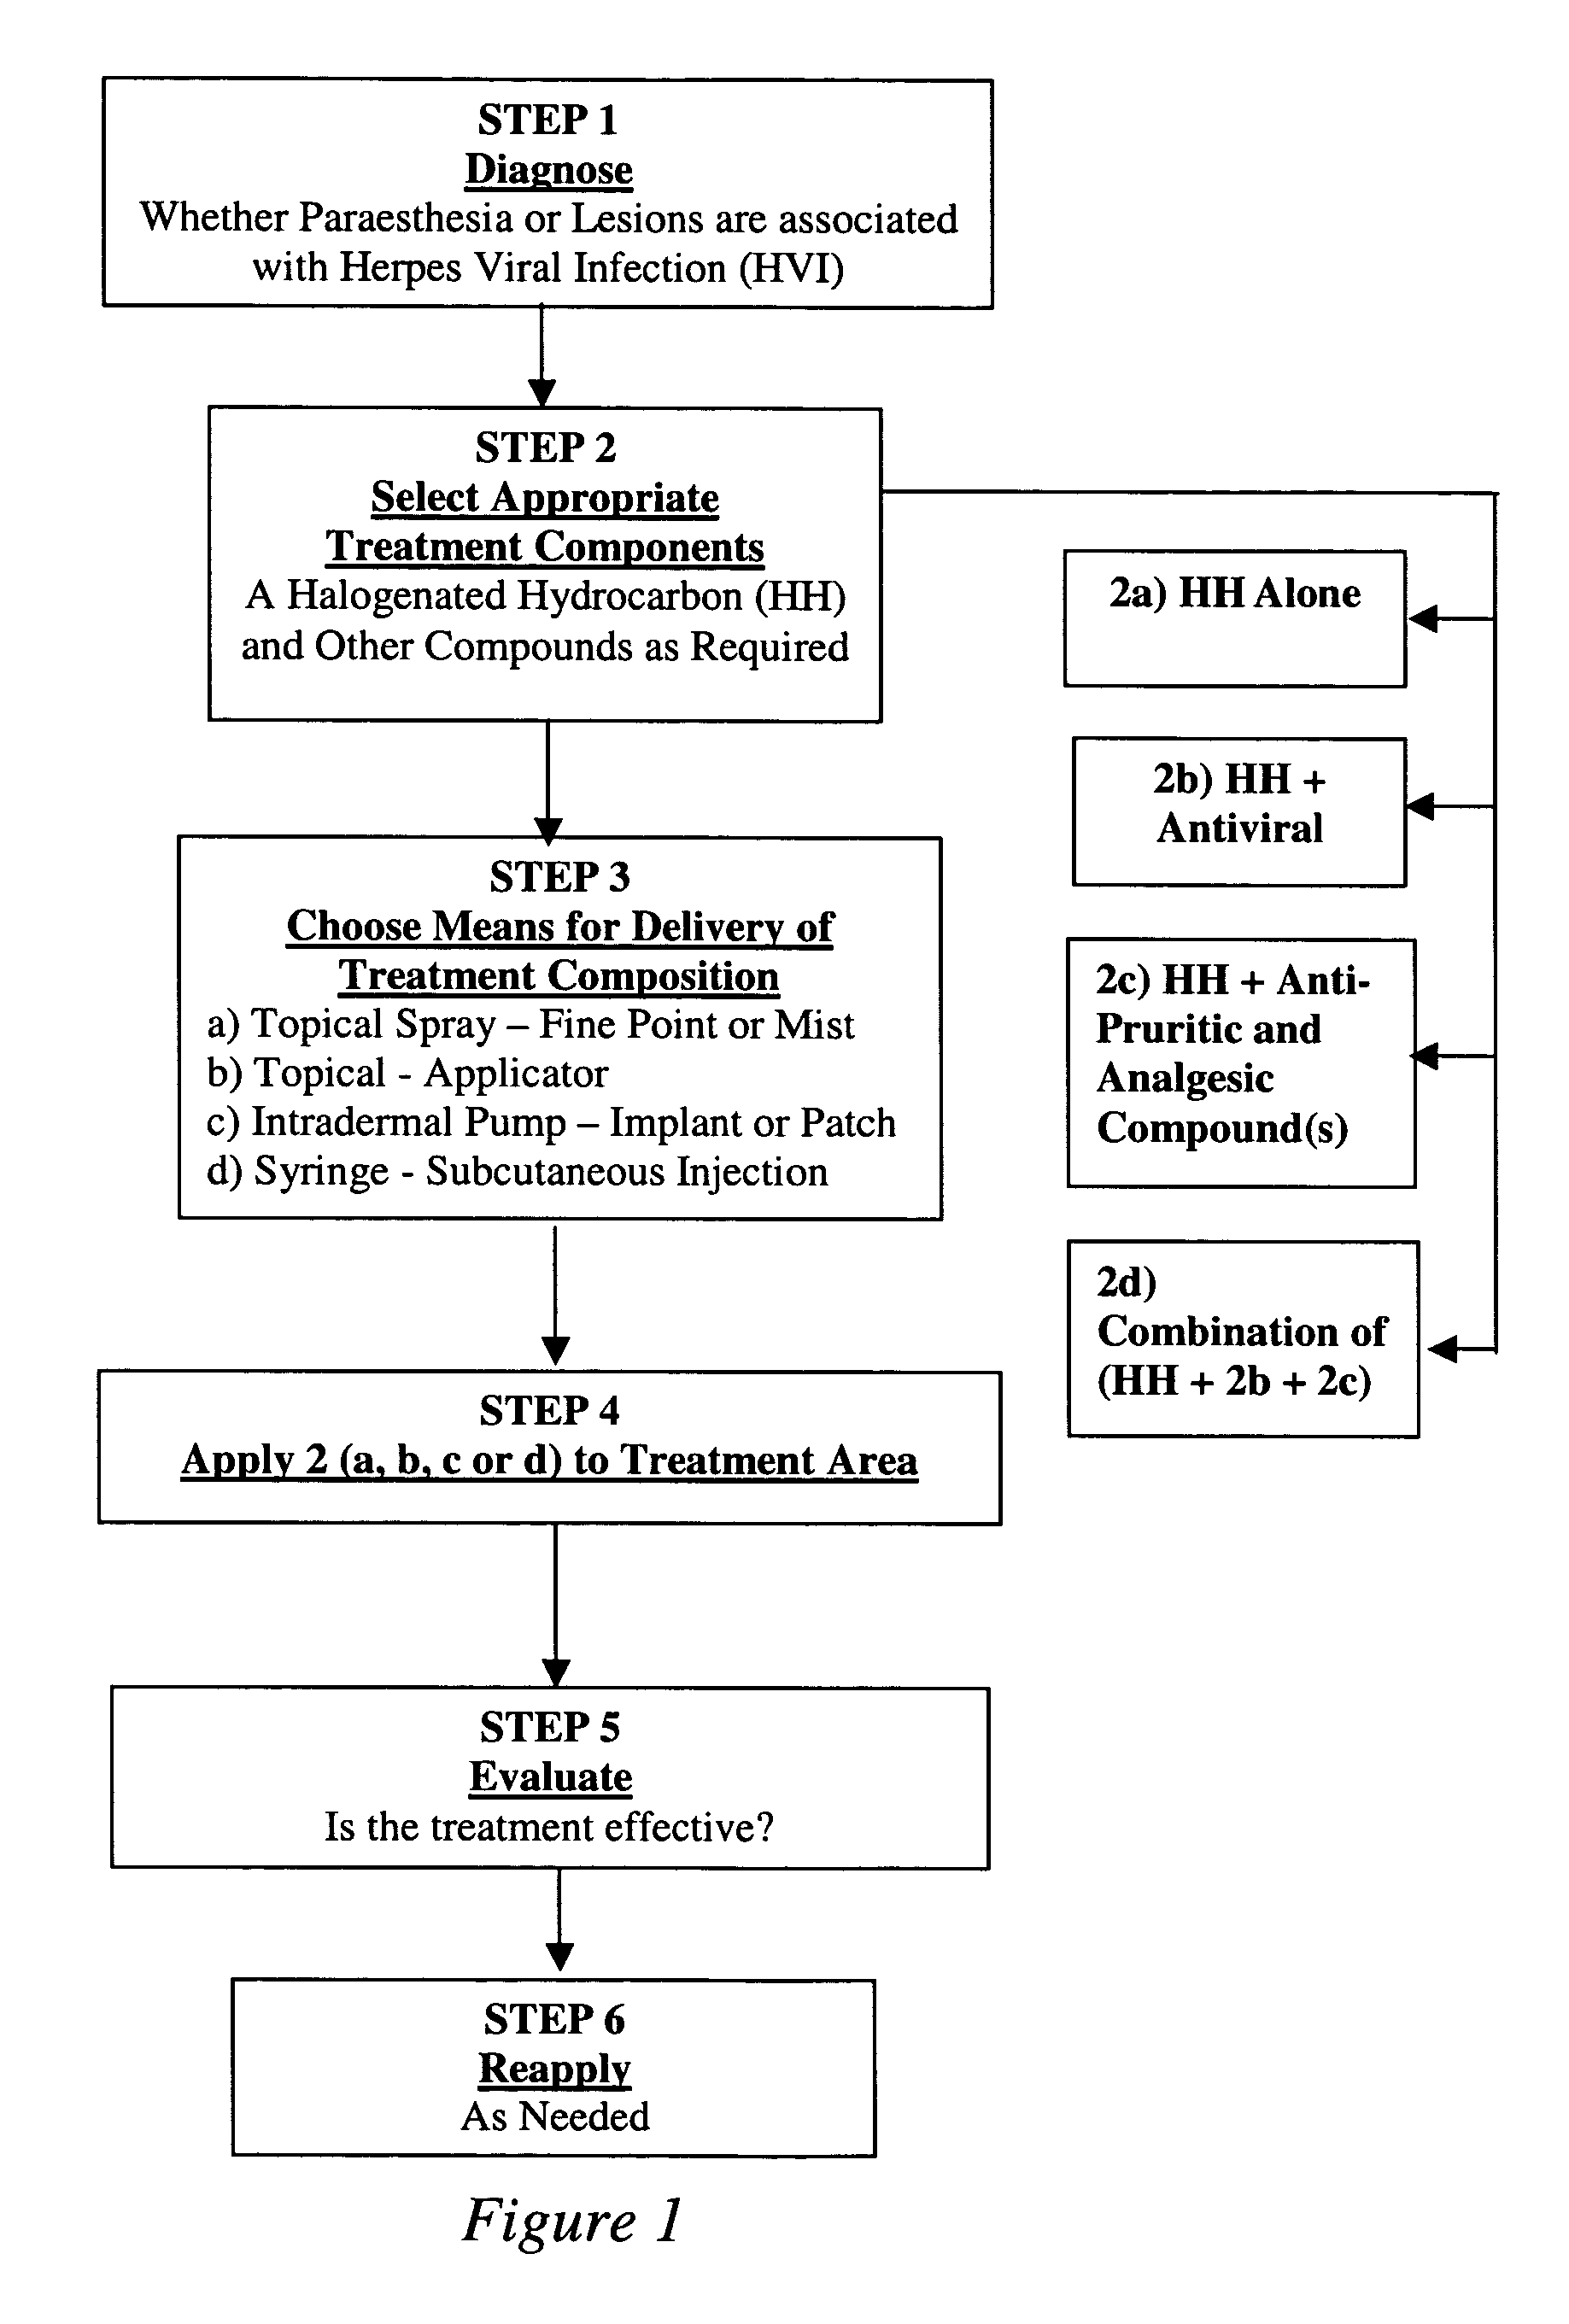 Method of treating herpes viral infections using a halogenated hydrocarbon composition